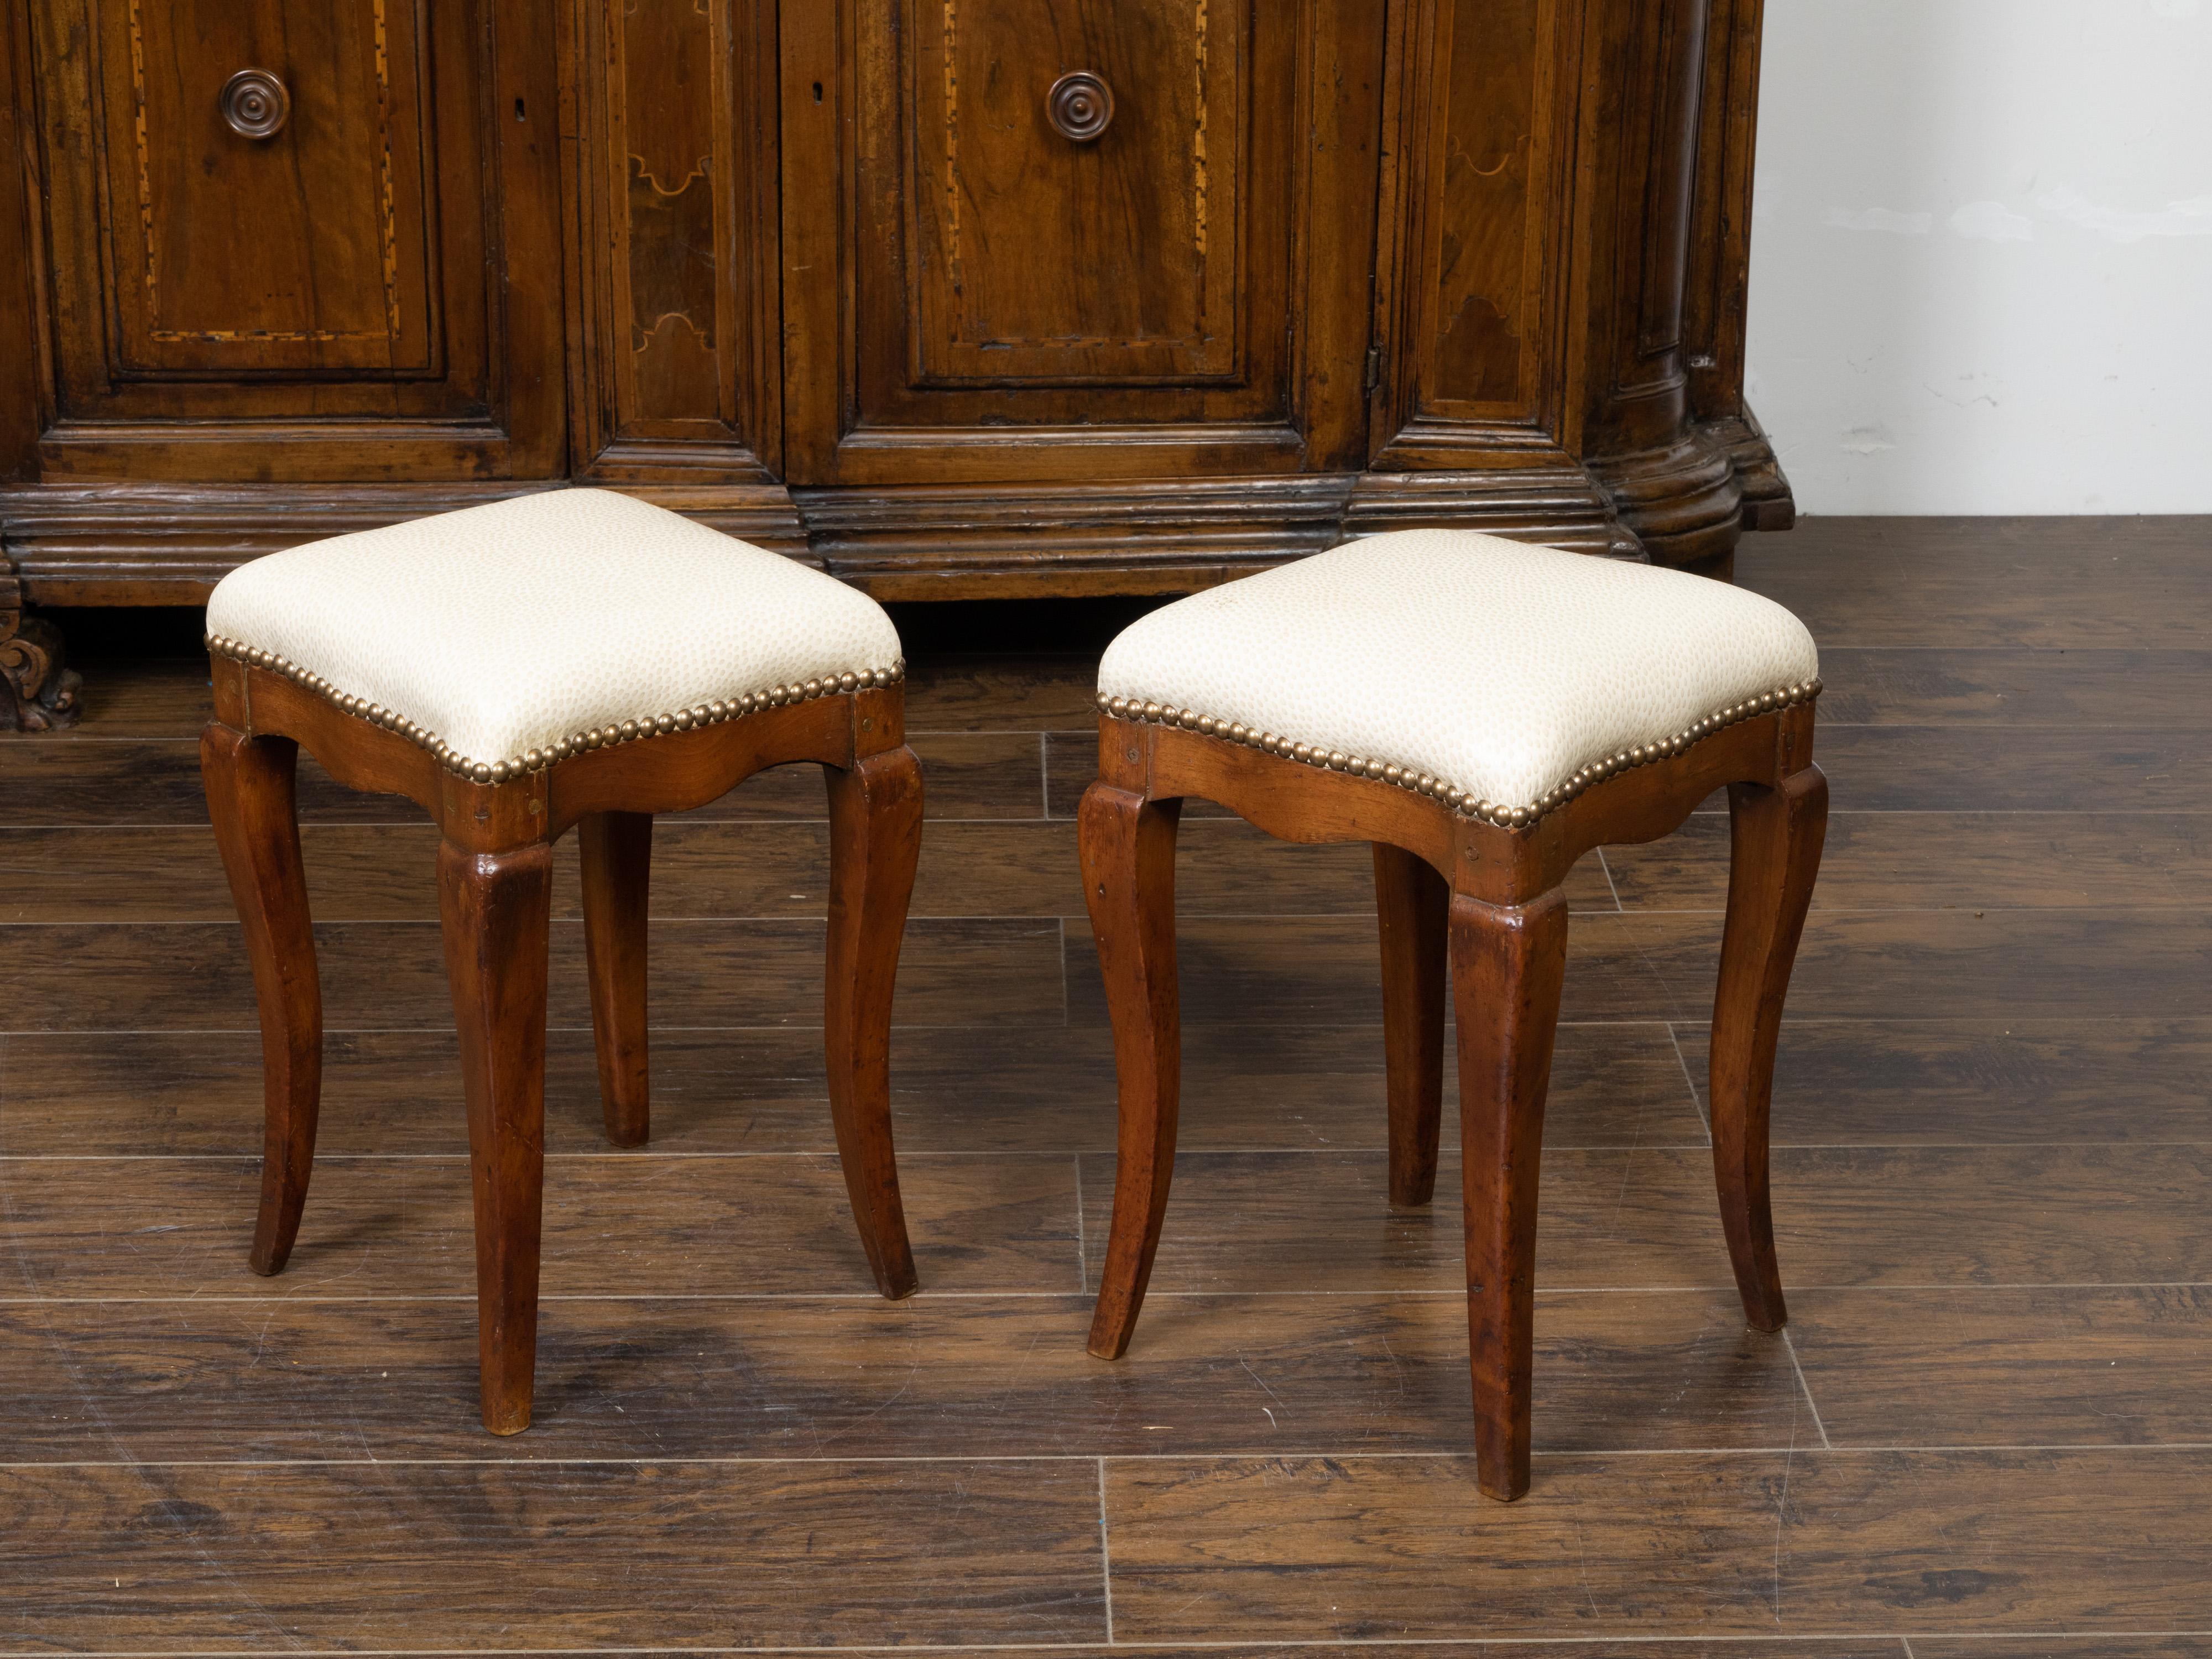 Pair of 19th Century Italian Walnut Stools with Cabriole Legs and New Upholstery For Sale 2